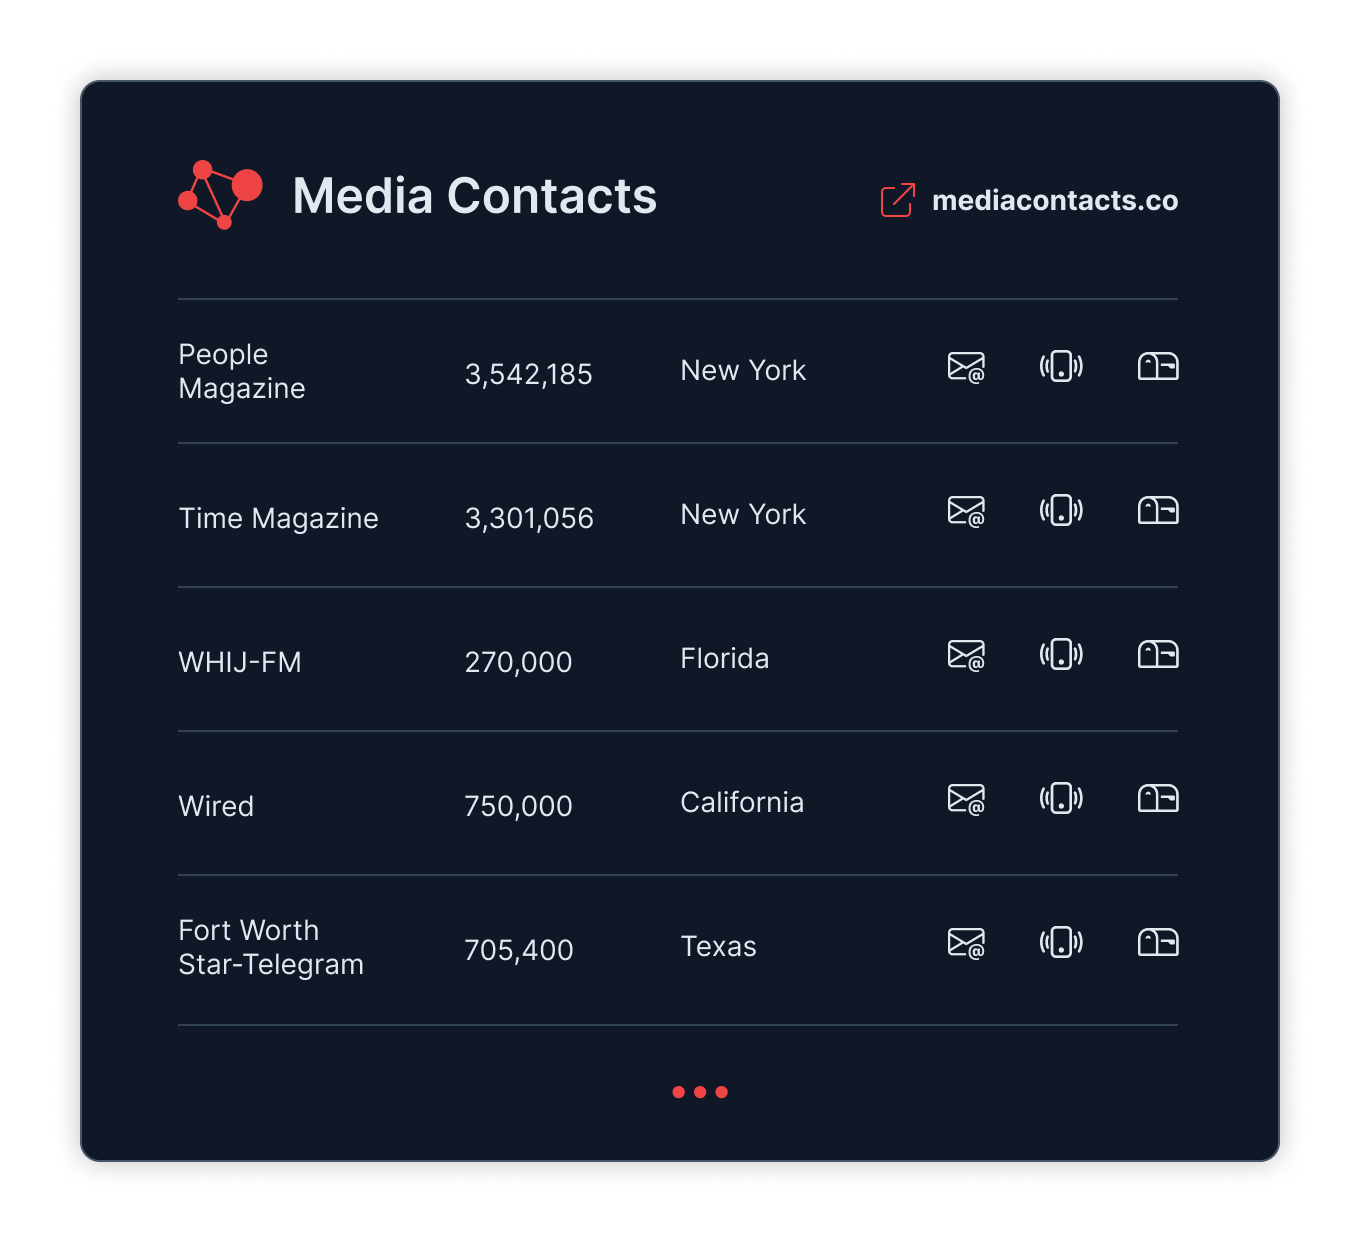 MediaContacts.co Launches Comprehensive Utah Media Contacts List - A Valuable Resource for PR, Media Outreach, and Press Release Distribution